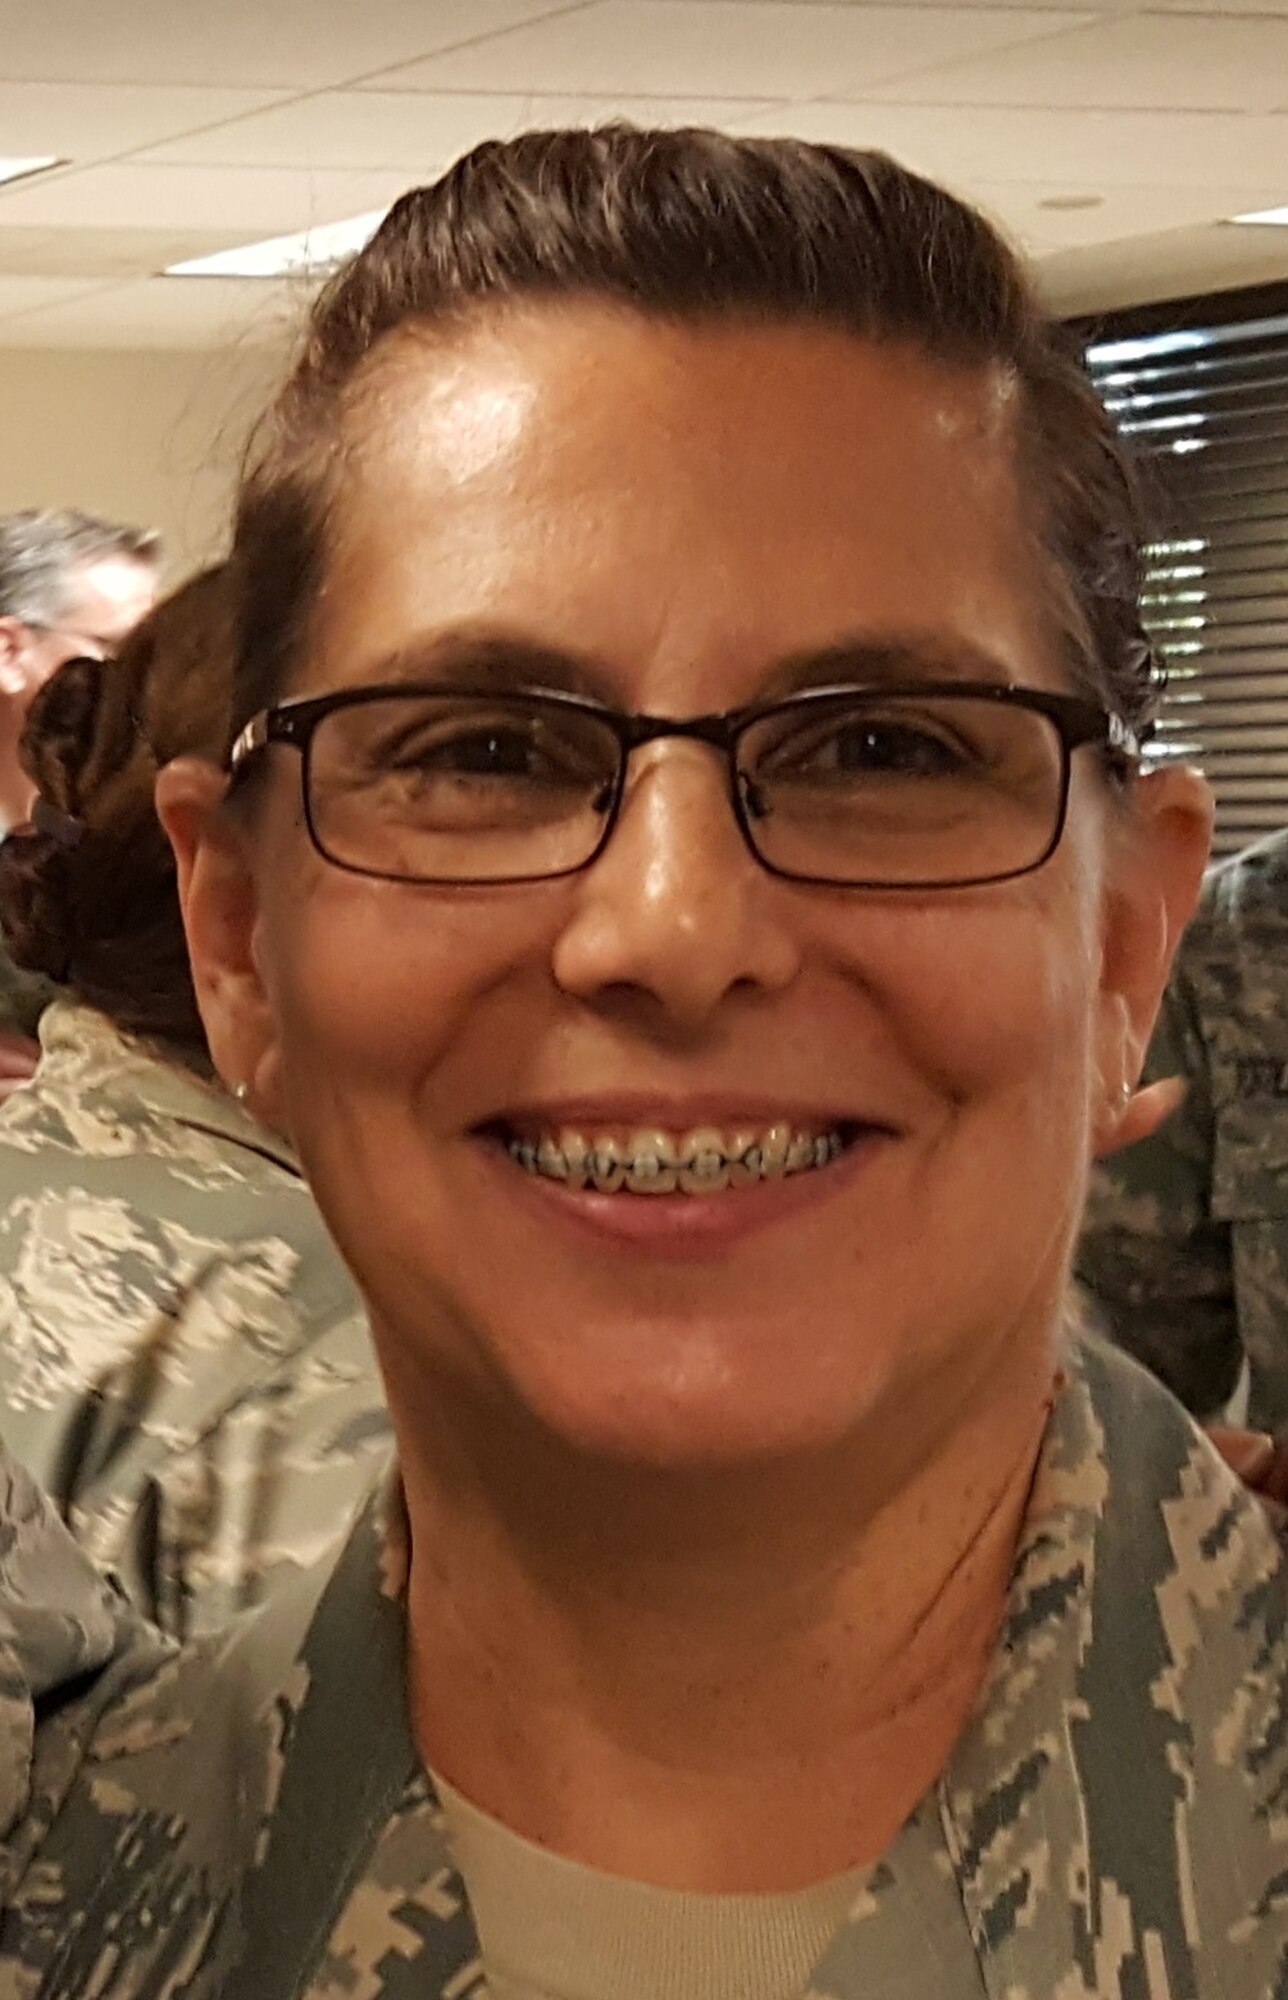 Commentary by Chief Master Sgt. Patricia L. Kawa’a, 349th Medical Group 
